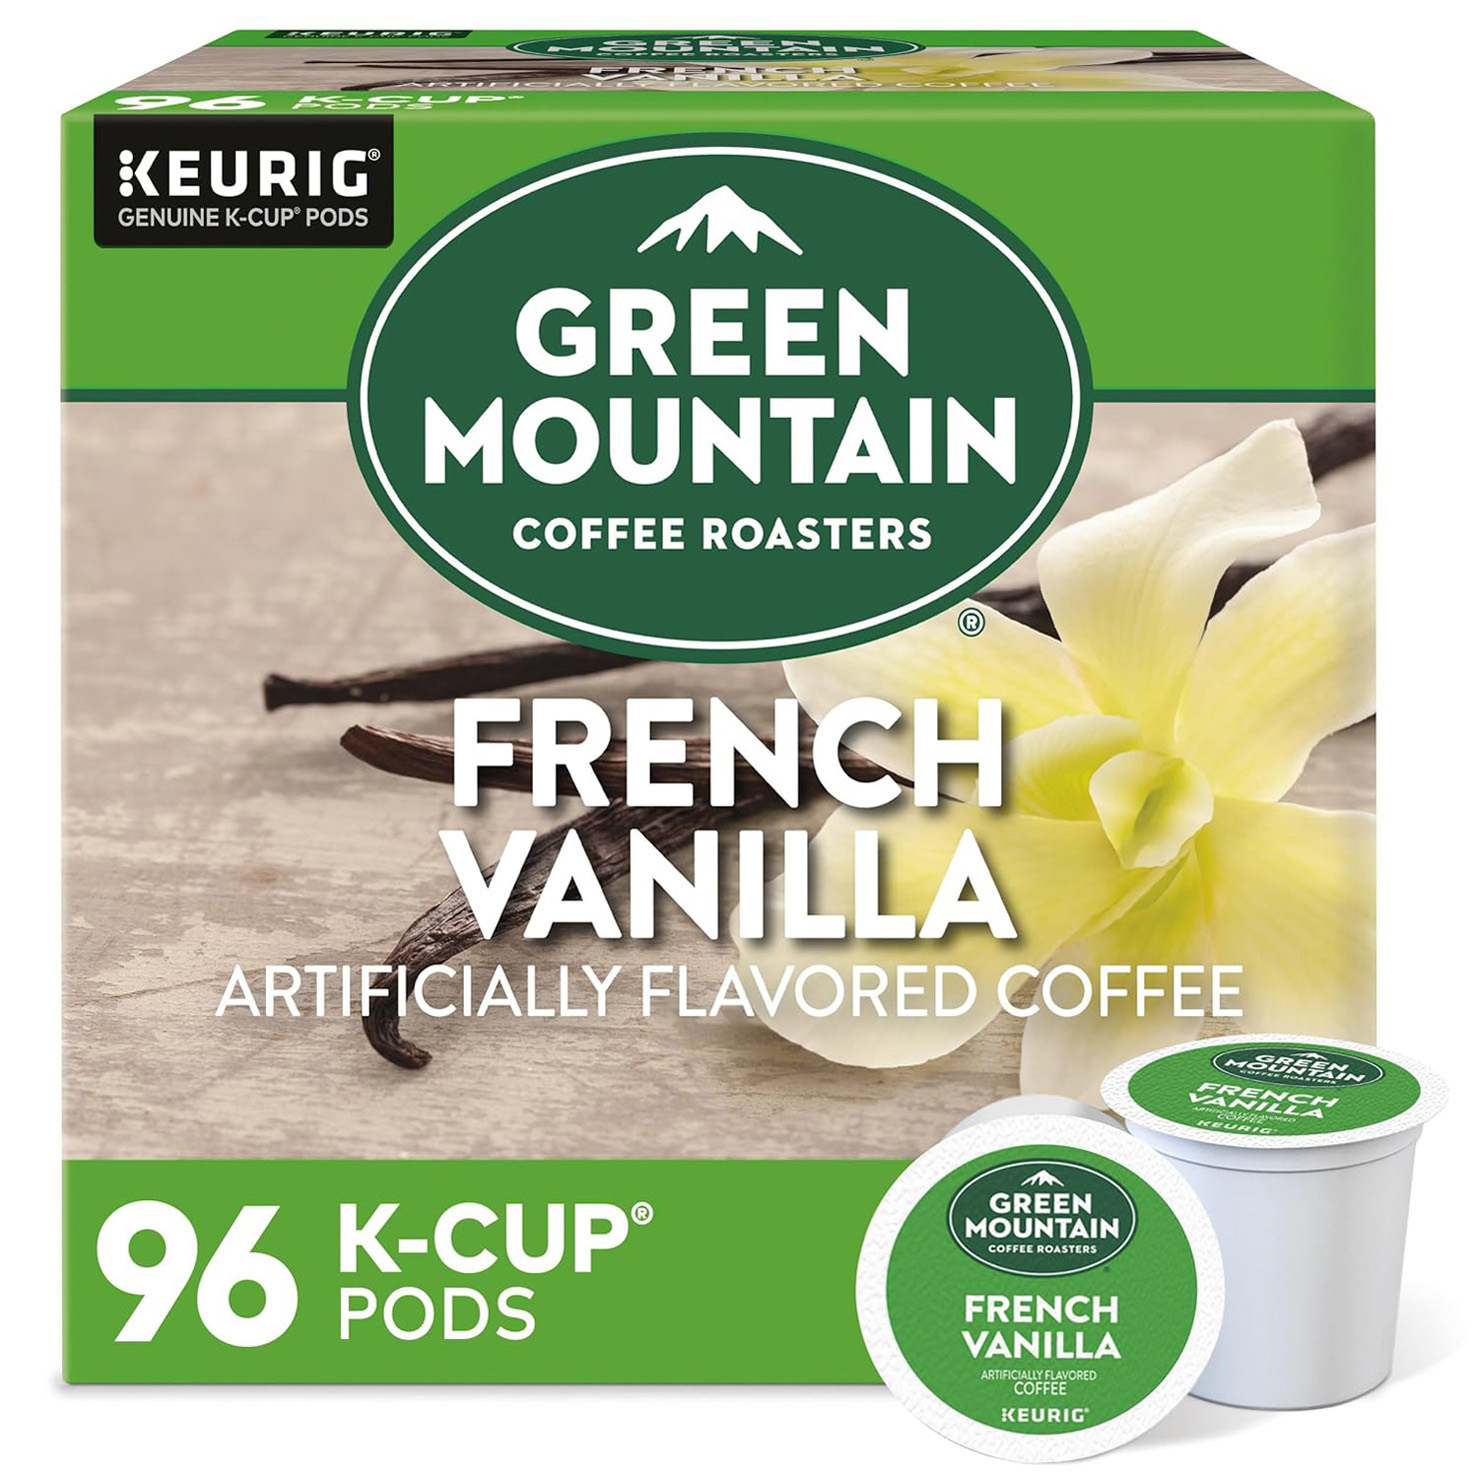 Green Mountain Coffee Roasters French Vanilla, Single-Serve Keurig K-Cup Pods, Flavored Light Roast Coffee Pods